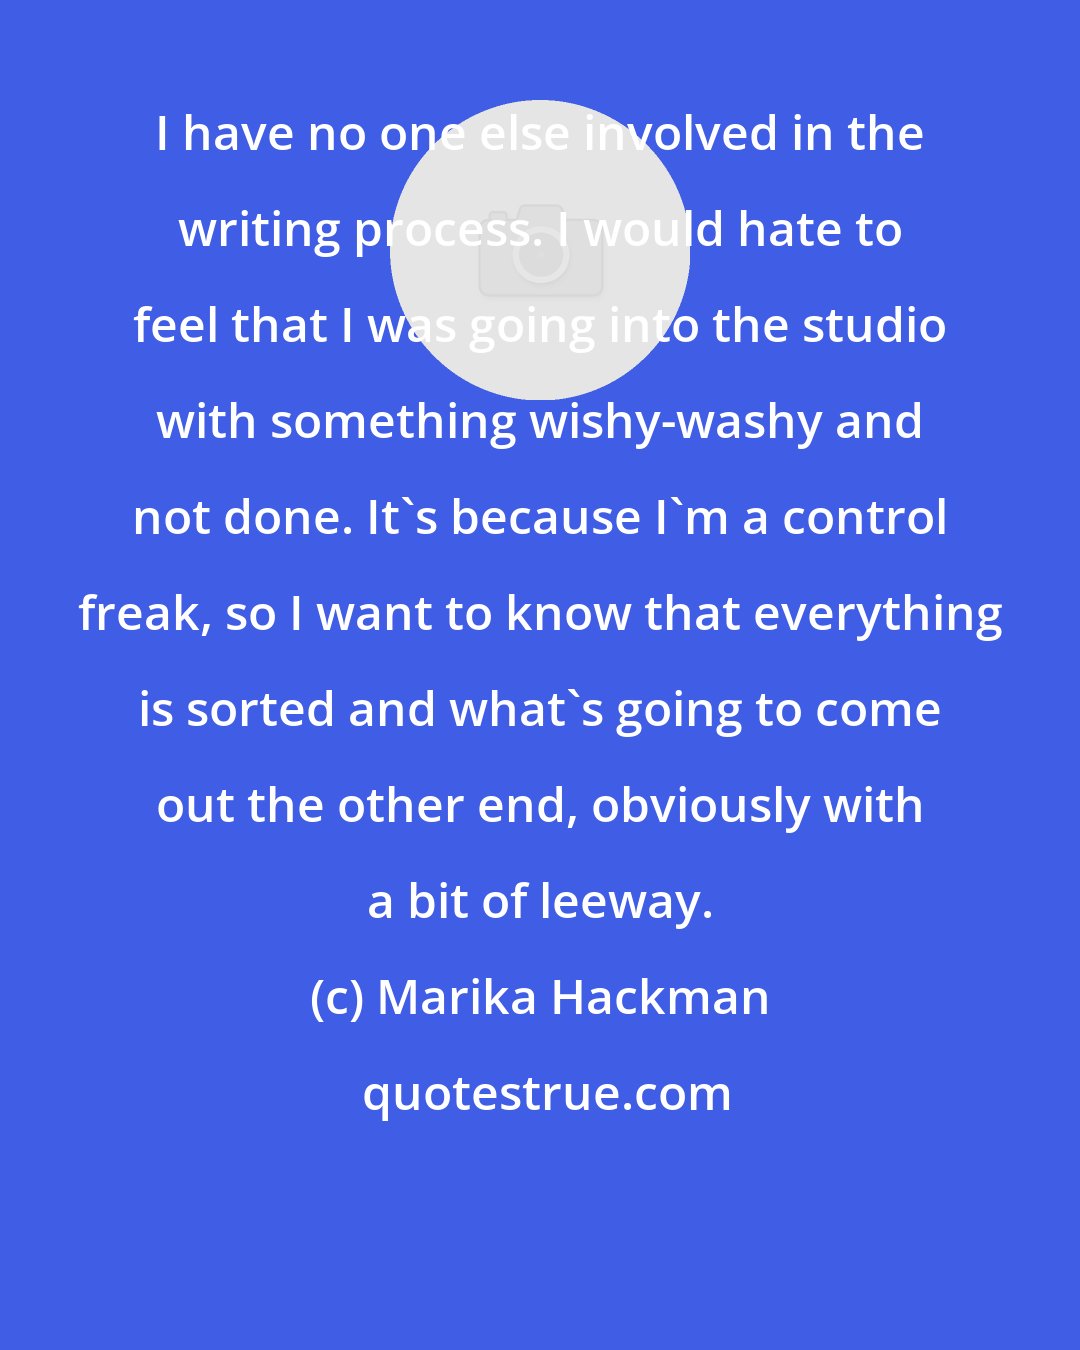 Marika Hackman: I have no one else involved in the writing process. I would hate to feel that I was going into the studio with something wishy-washy and not done. It's because I'm a control freak, so I want to know that everything is sorted and what's going to come out the other end, obviously with a bit of leeway.